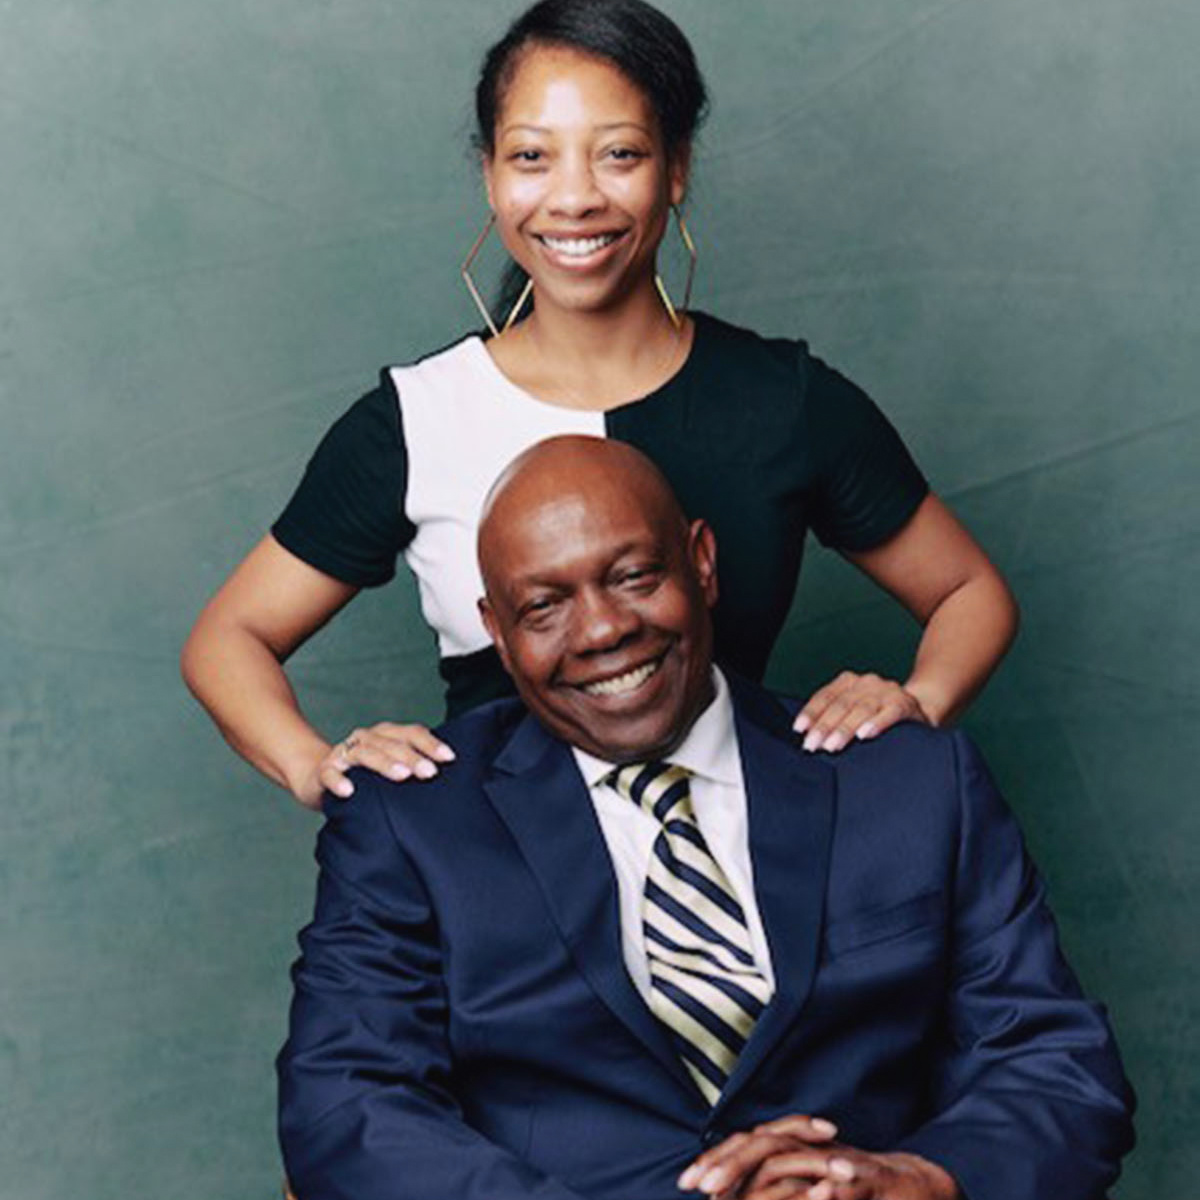 A portrait of Malia Fredrick and her father: he is sitting on a chair and smiling, she is behind him with her hands on his shoulders.